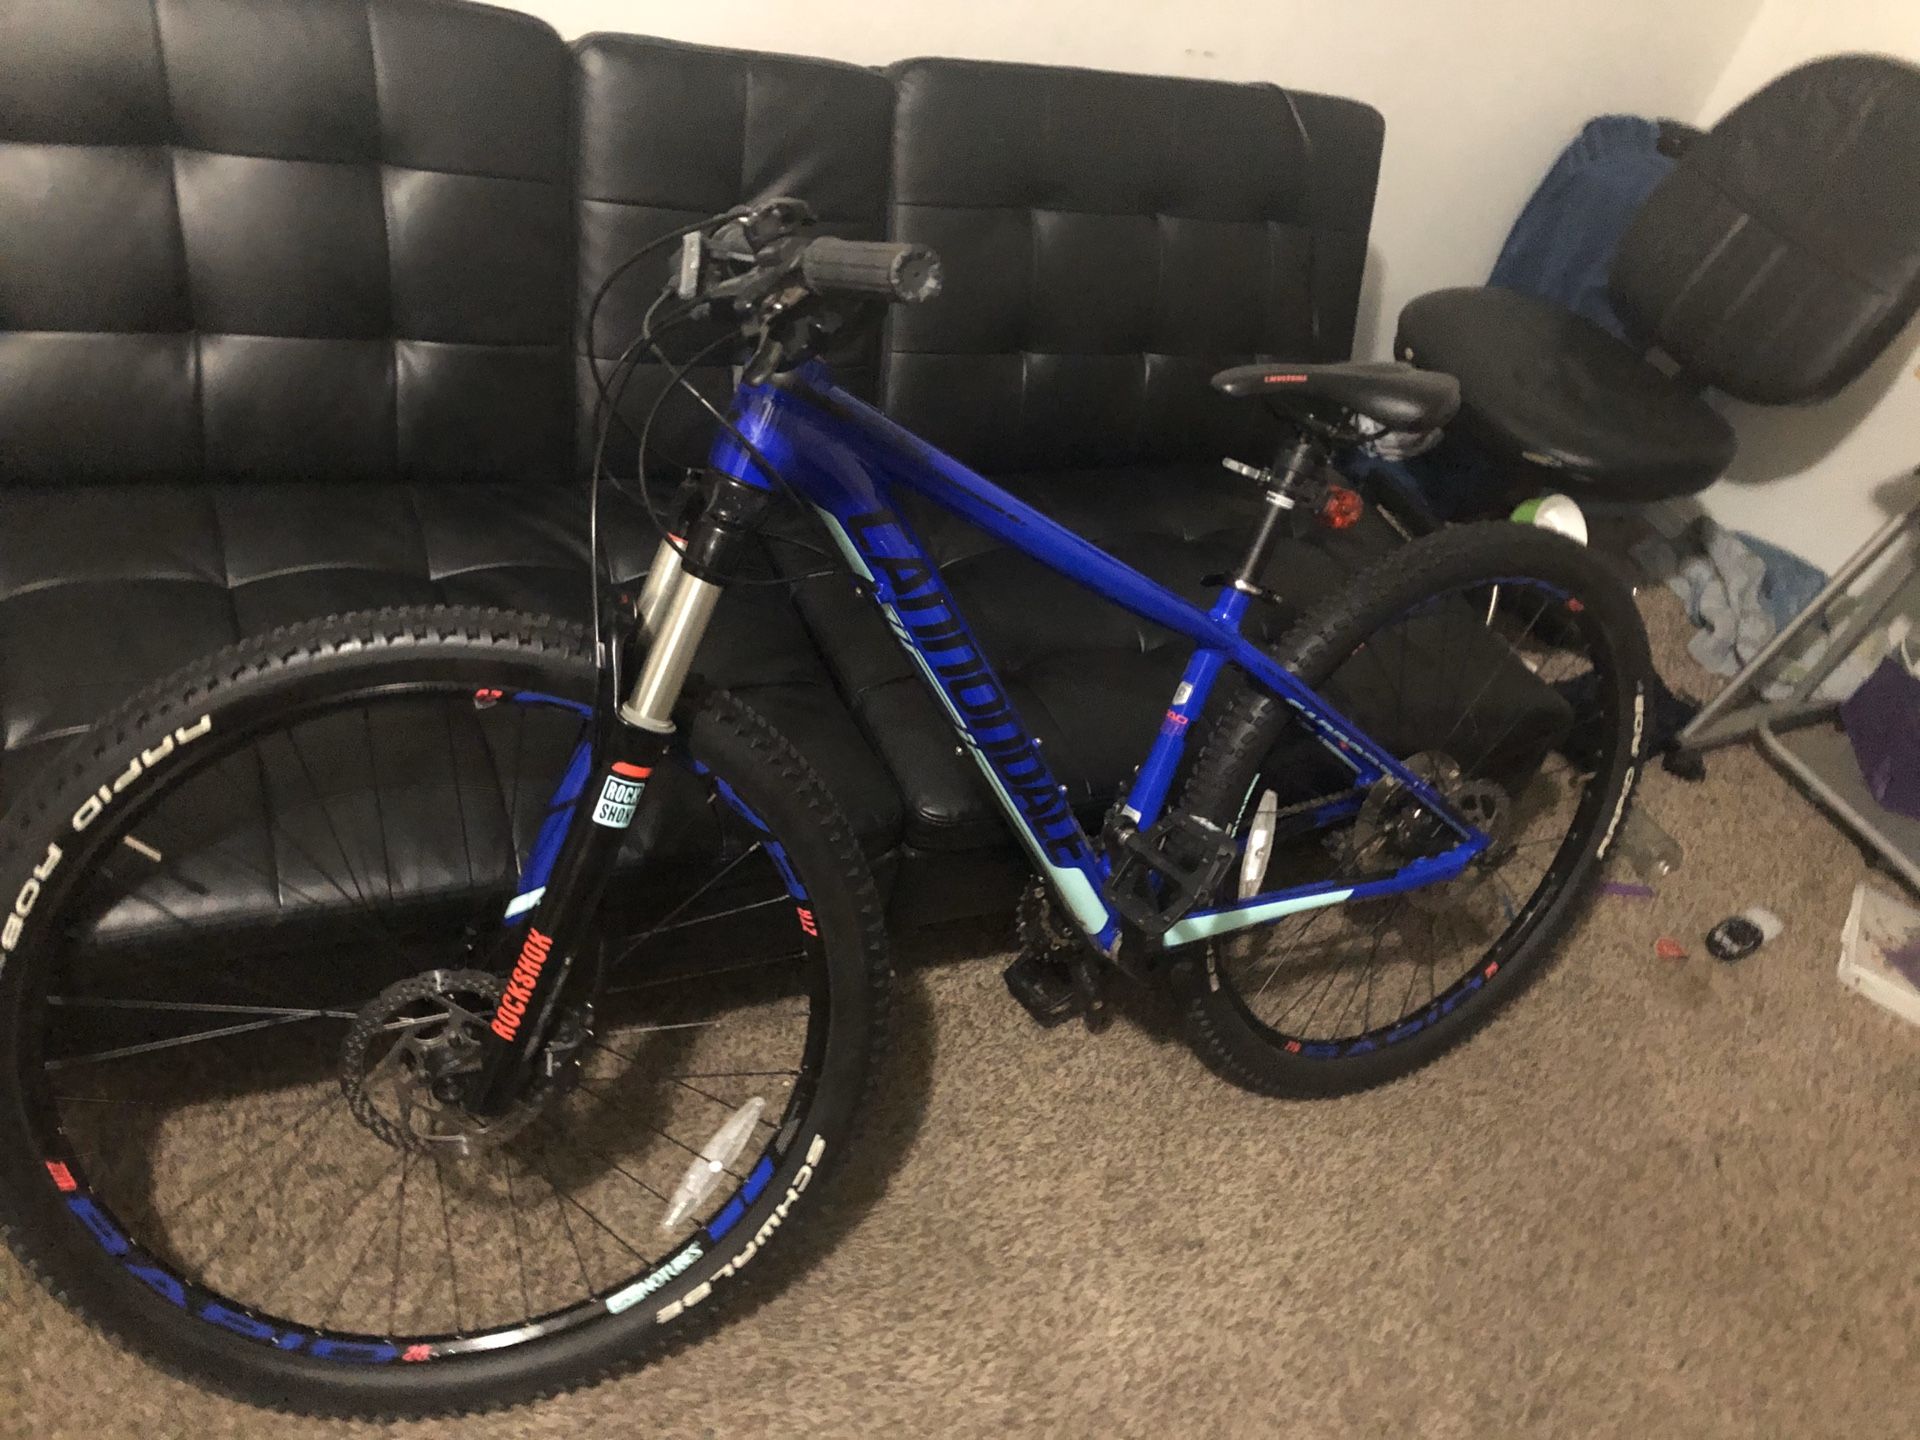 2017 Cannondale mod 1 Mountain bike. The bike is 37 inches from the ground up to the handlebars.Bike must go today